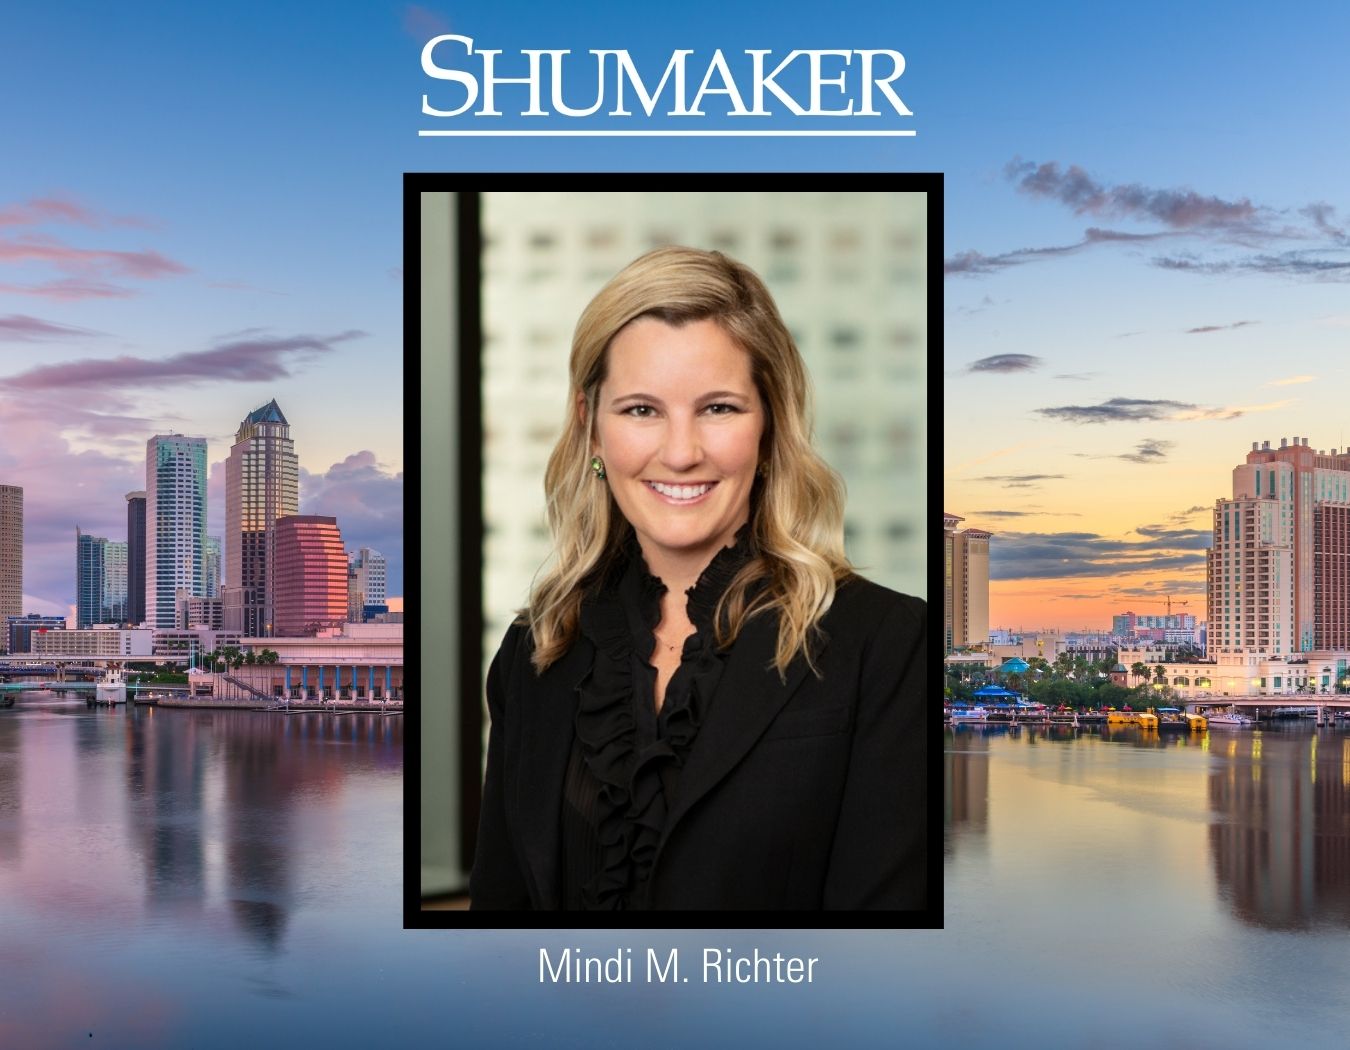 Shumaker's Longstanding Commitment to the Tampa Bay Bowl Deepens with Election of Mindi Richter to the Board of Directors